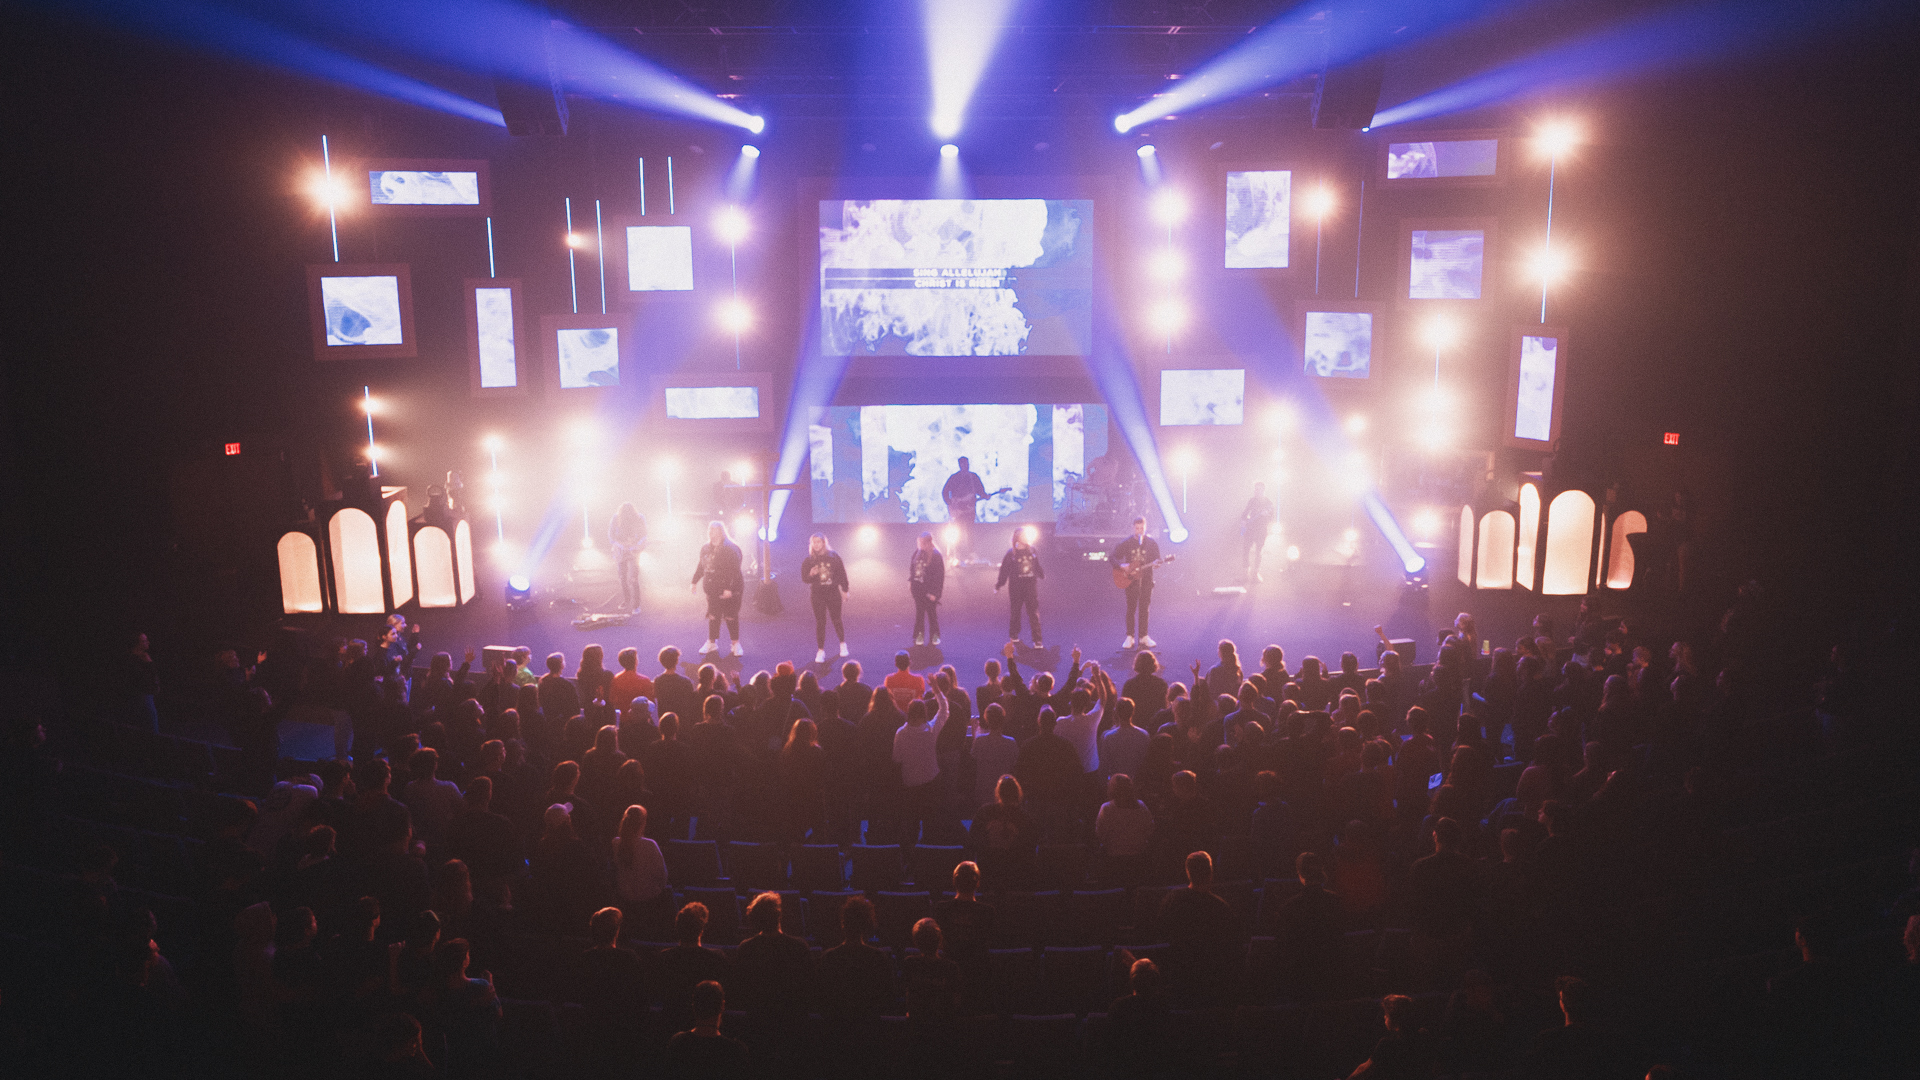 God did amazing things at The Weekend!